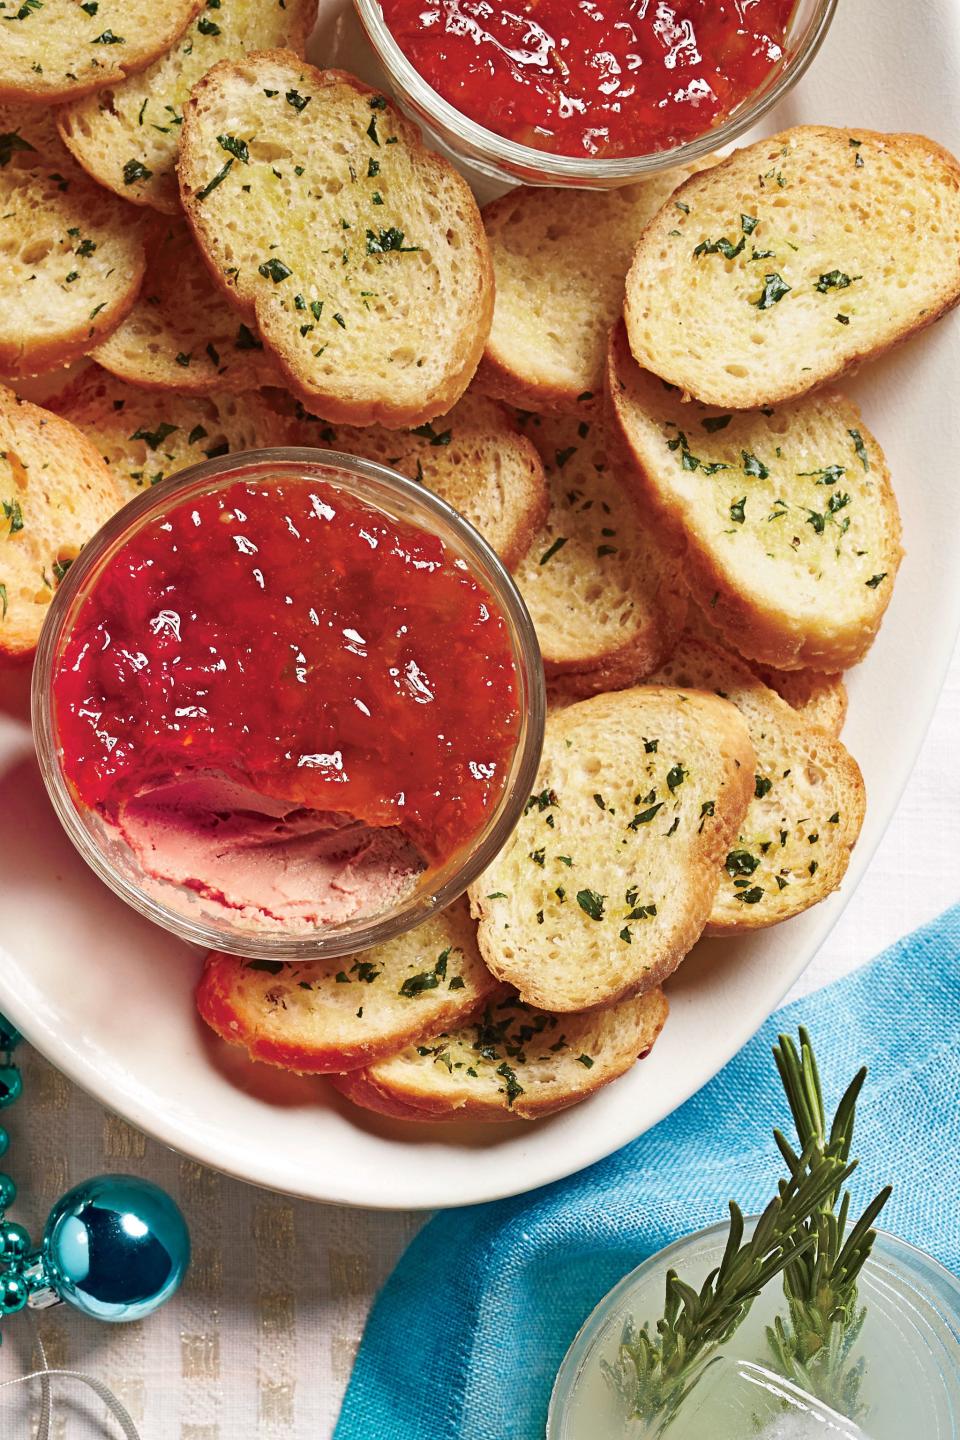 Chicken Liver Mousse Crostini with Pepper Jelly